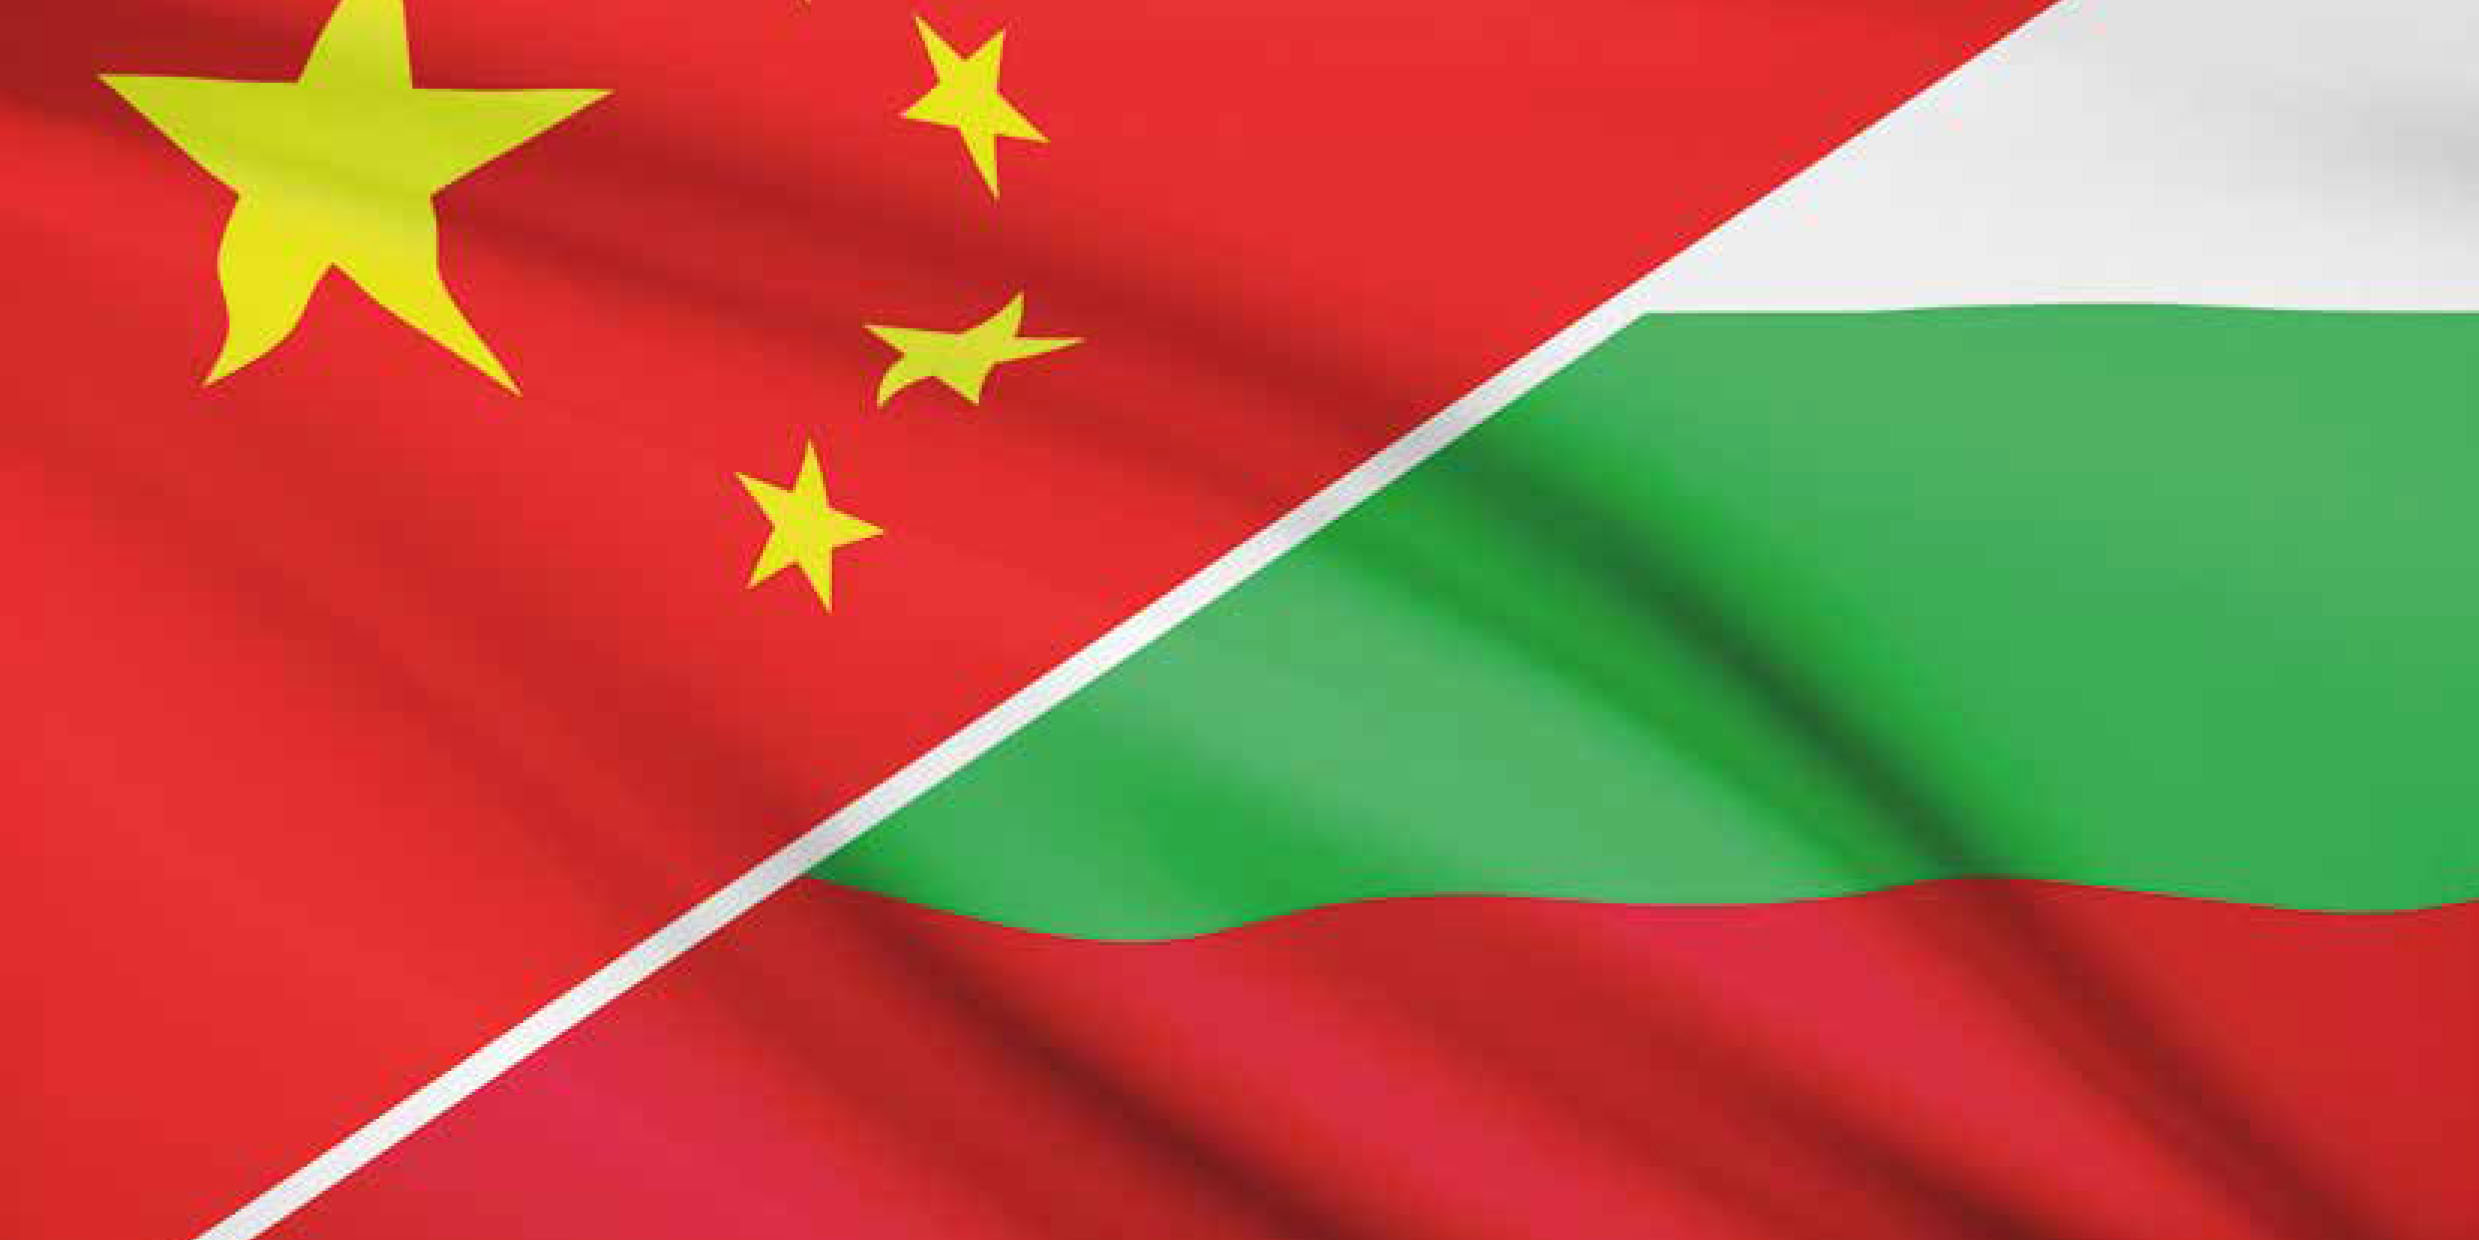 Deeping the international economic and commercial relations between Bulgaria and the People’s Republic of China has been discussed at formal meeting h